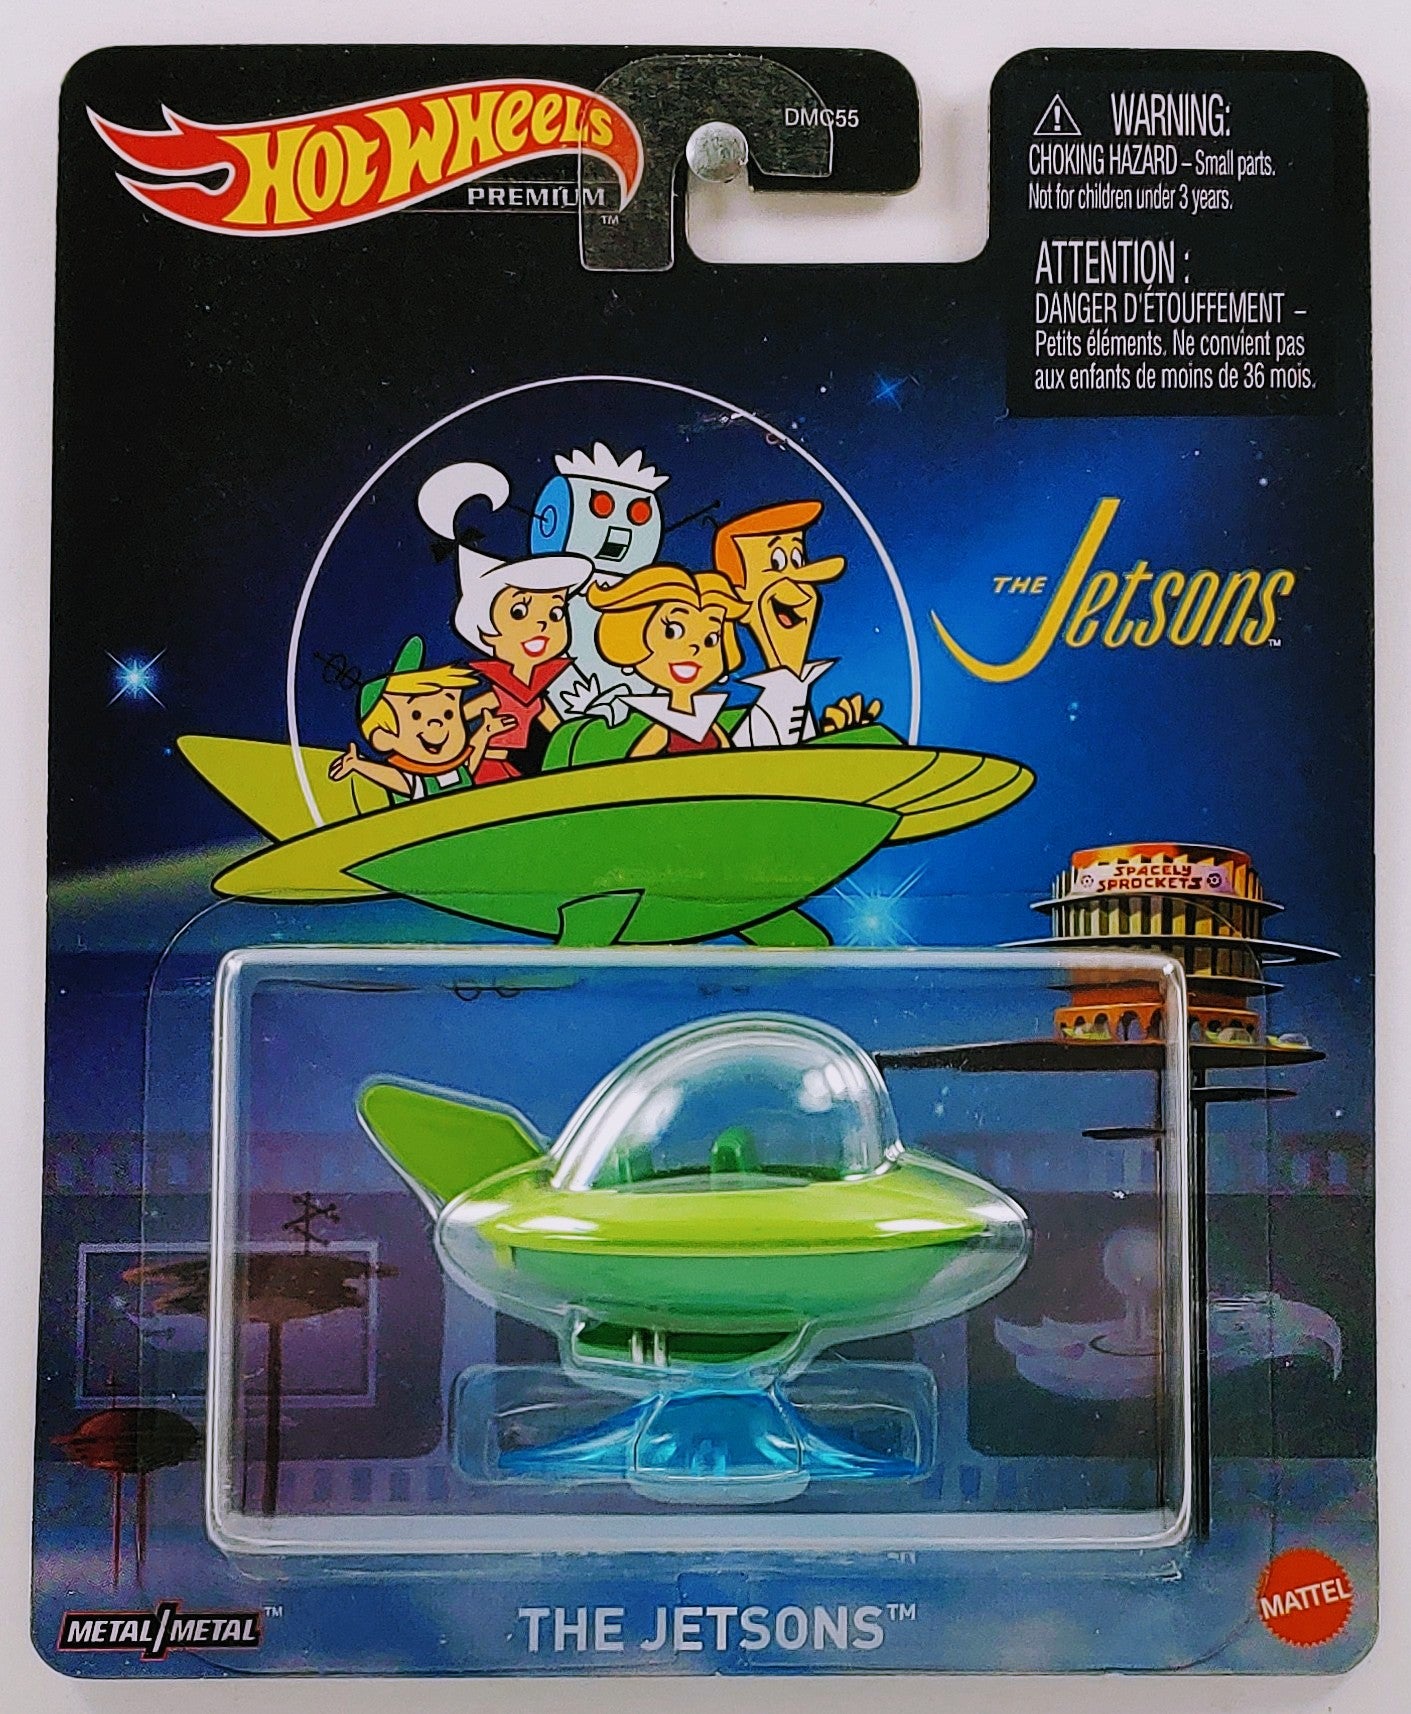 Hot Wheels 2023 - Premium / Entertainment / The Jetsons - The Jetsons - Green - Metal/Metal & Stand